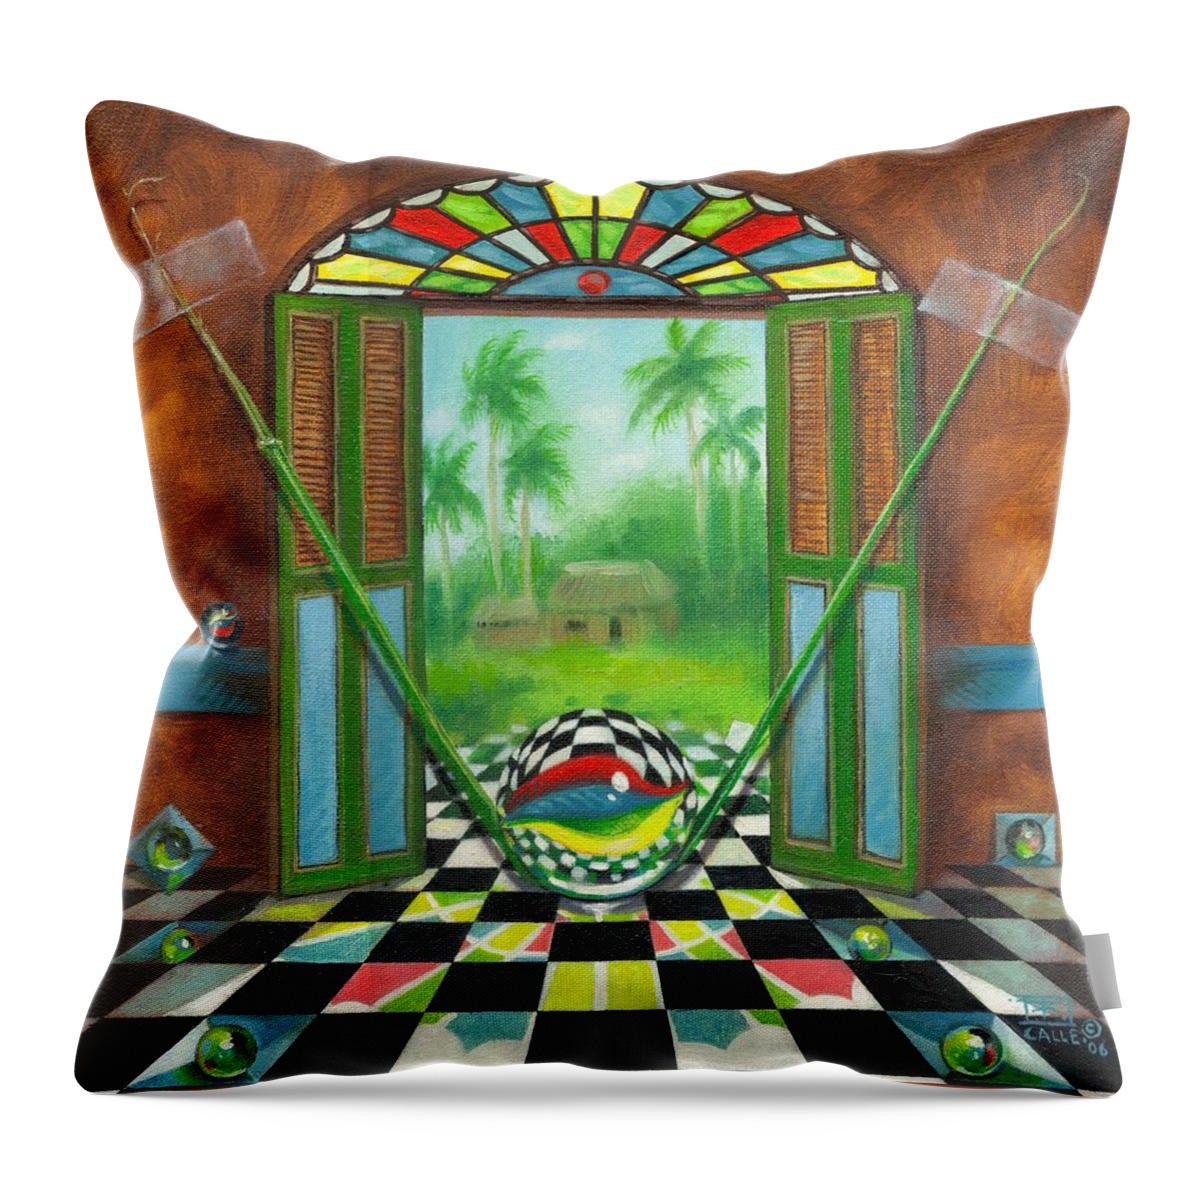 Marbles Throw Pillow featuring the painting Vitrales Campesino by Roger Calle